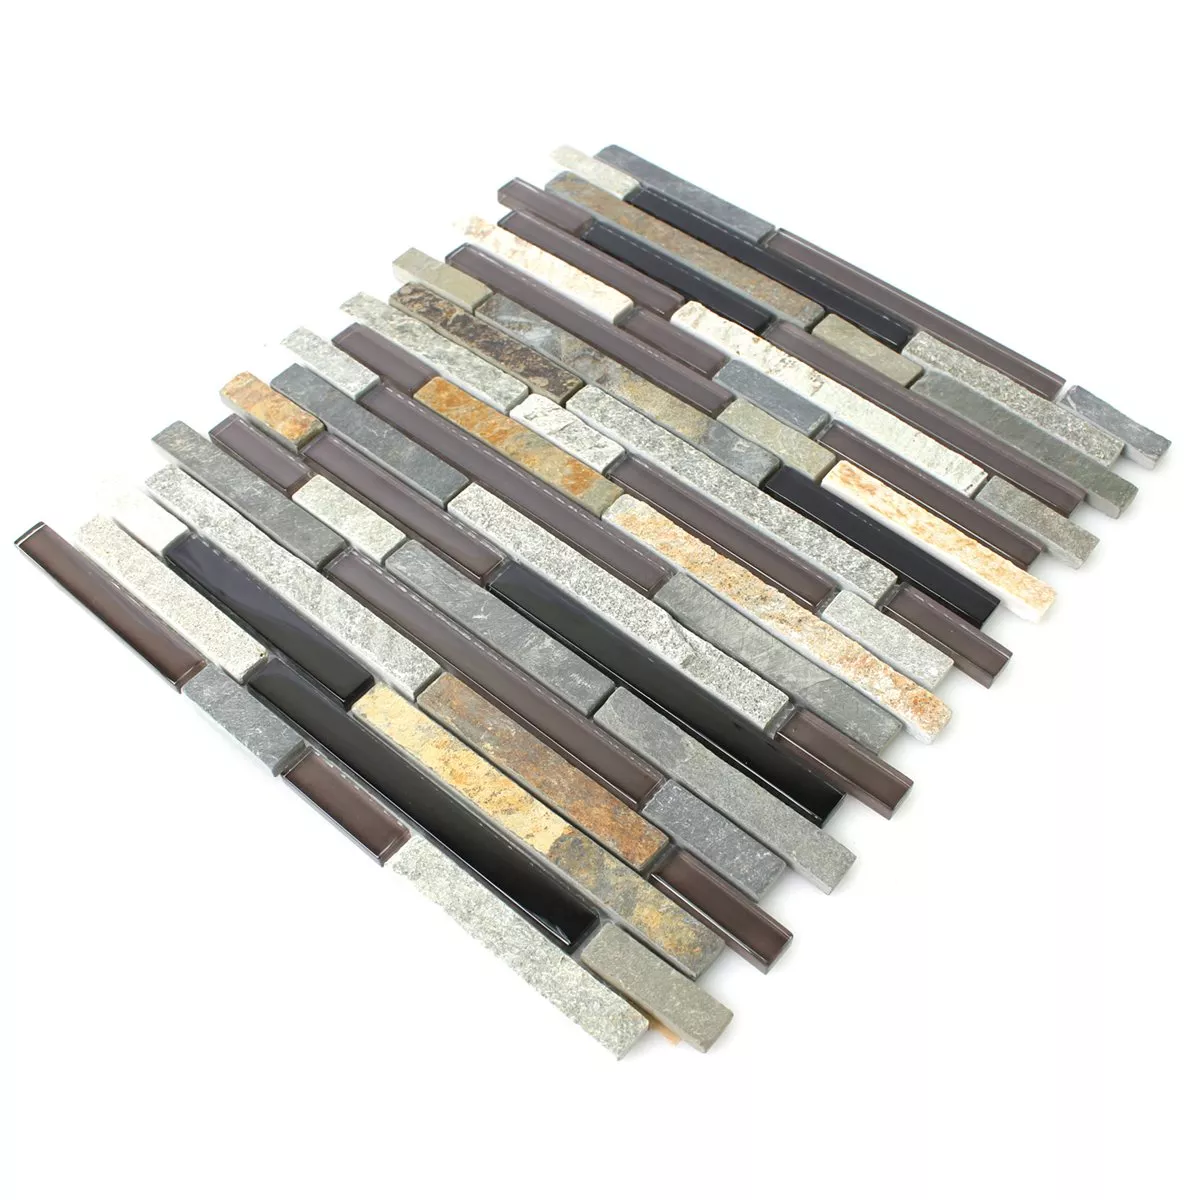 Sample Mosaic Tiles Glass Natural Stone Grey Beige Brown Mix